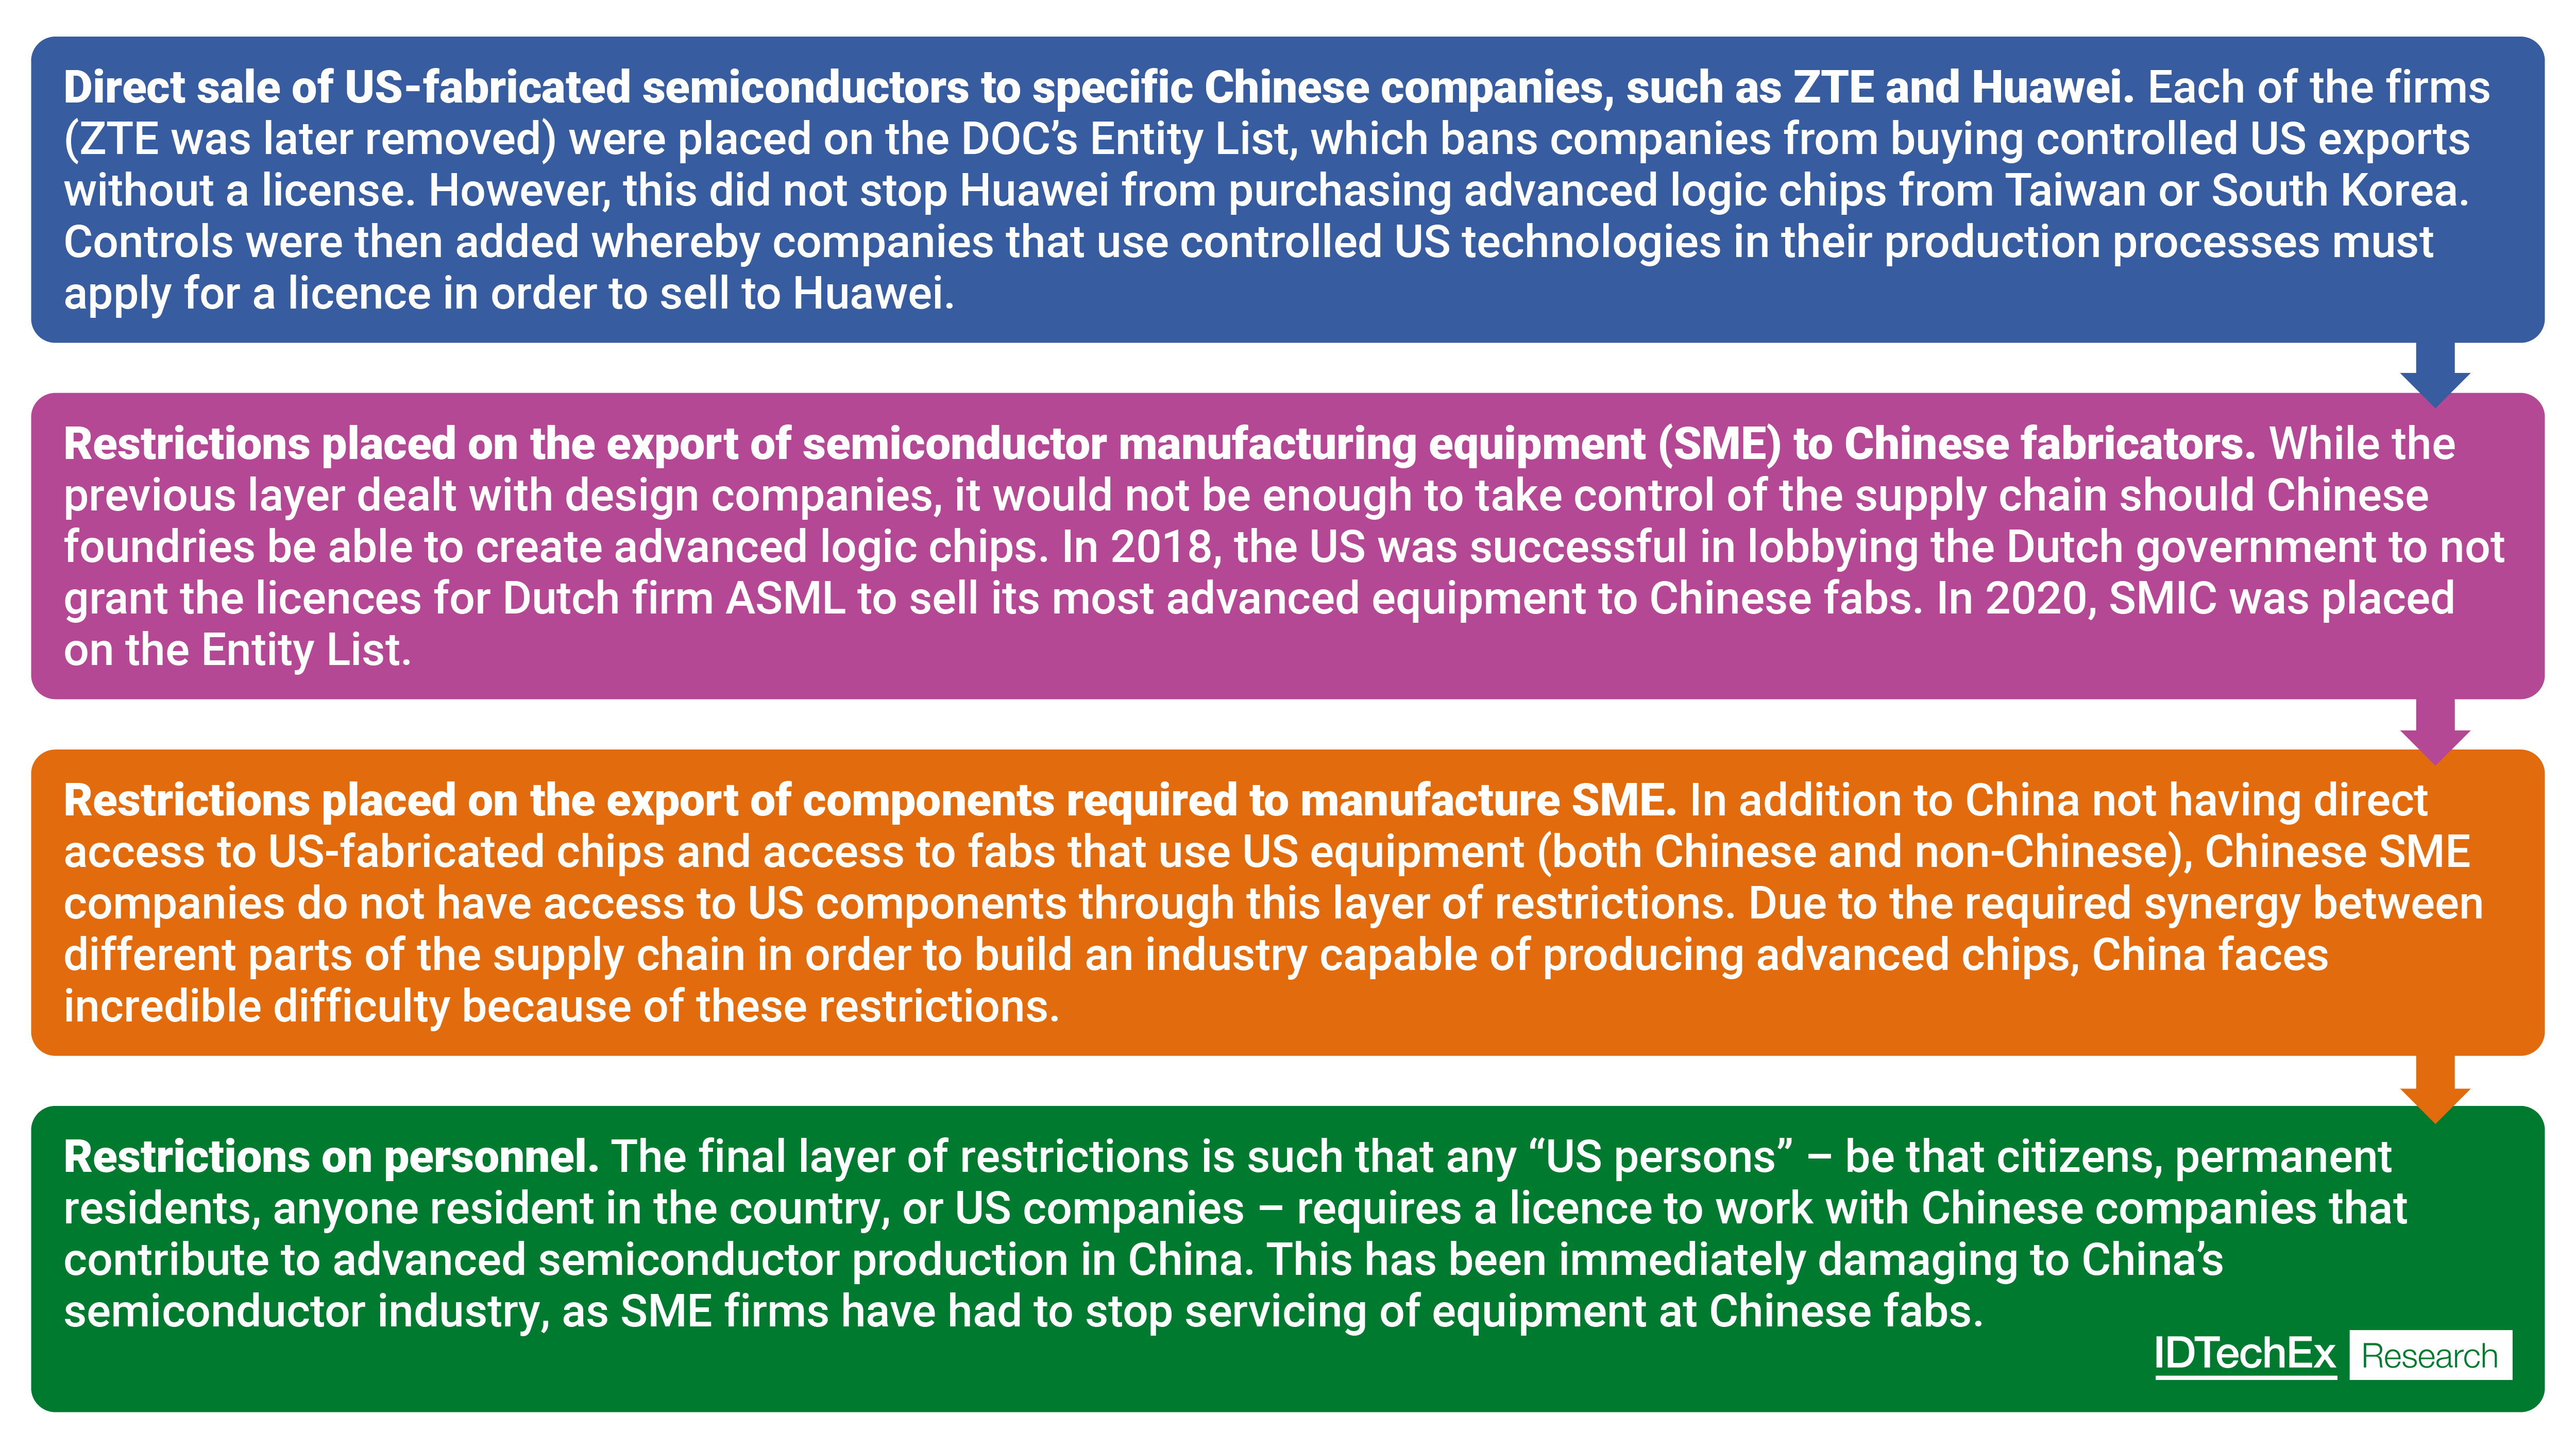 The tiered restrictions placed on China by the US, where semiconductor design, manufacture, and imports are concerned. Source: IDTechEx